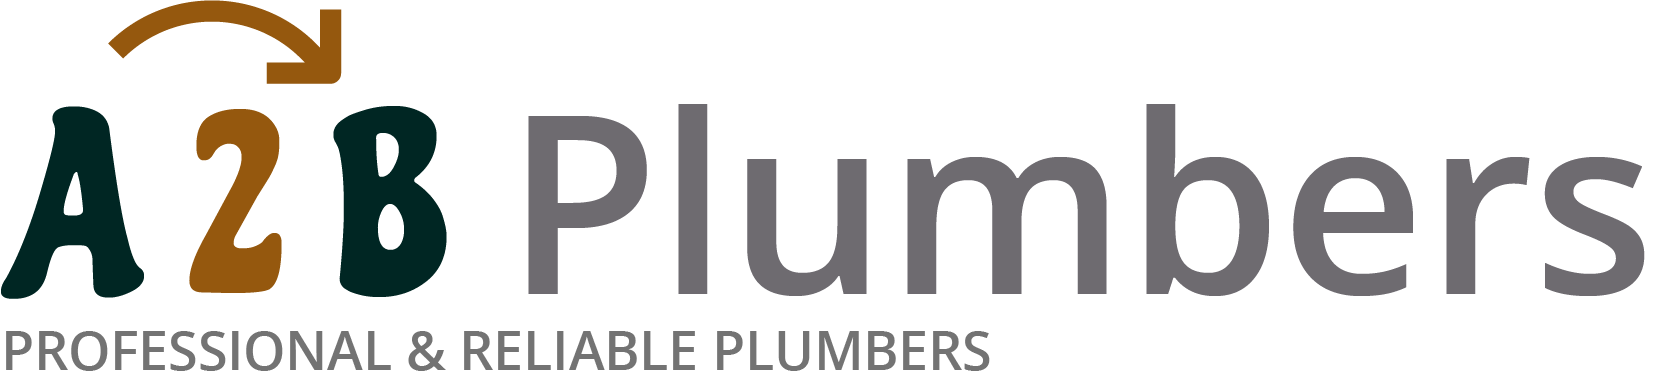 If you need a boiler installed, a radiator repaired or a leaking tap fixed, call us now - we provide services for properties in Scunthorpe and the local area.